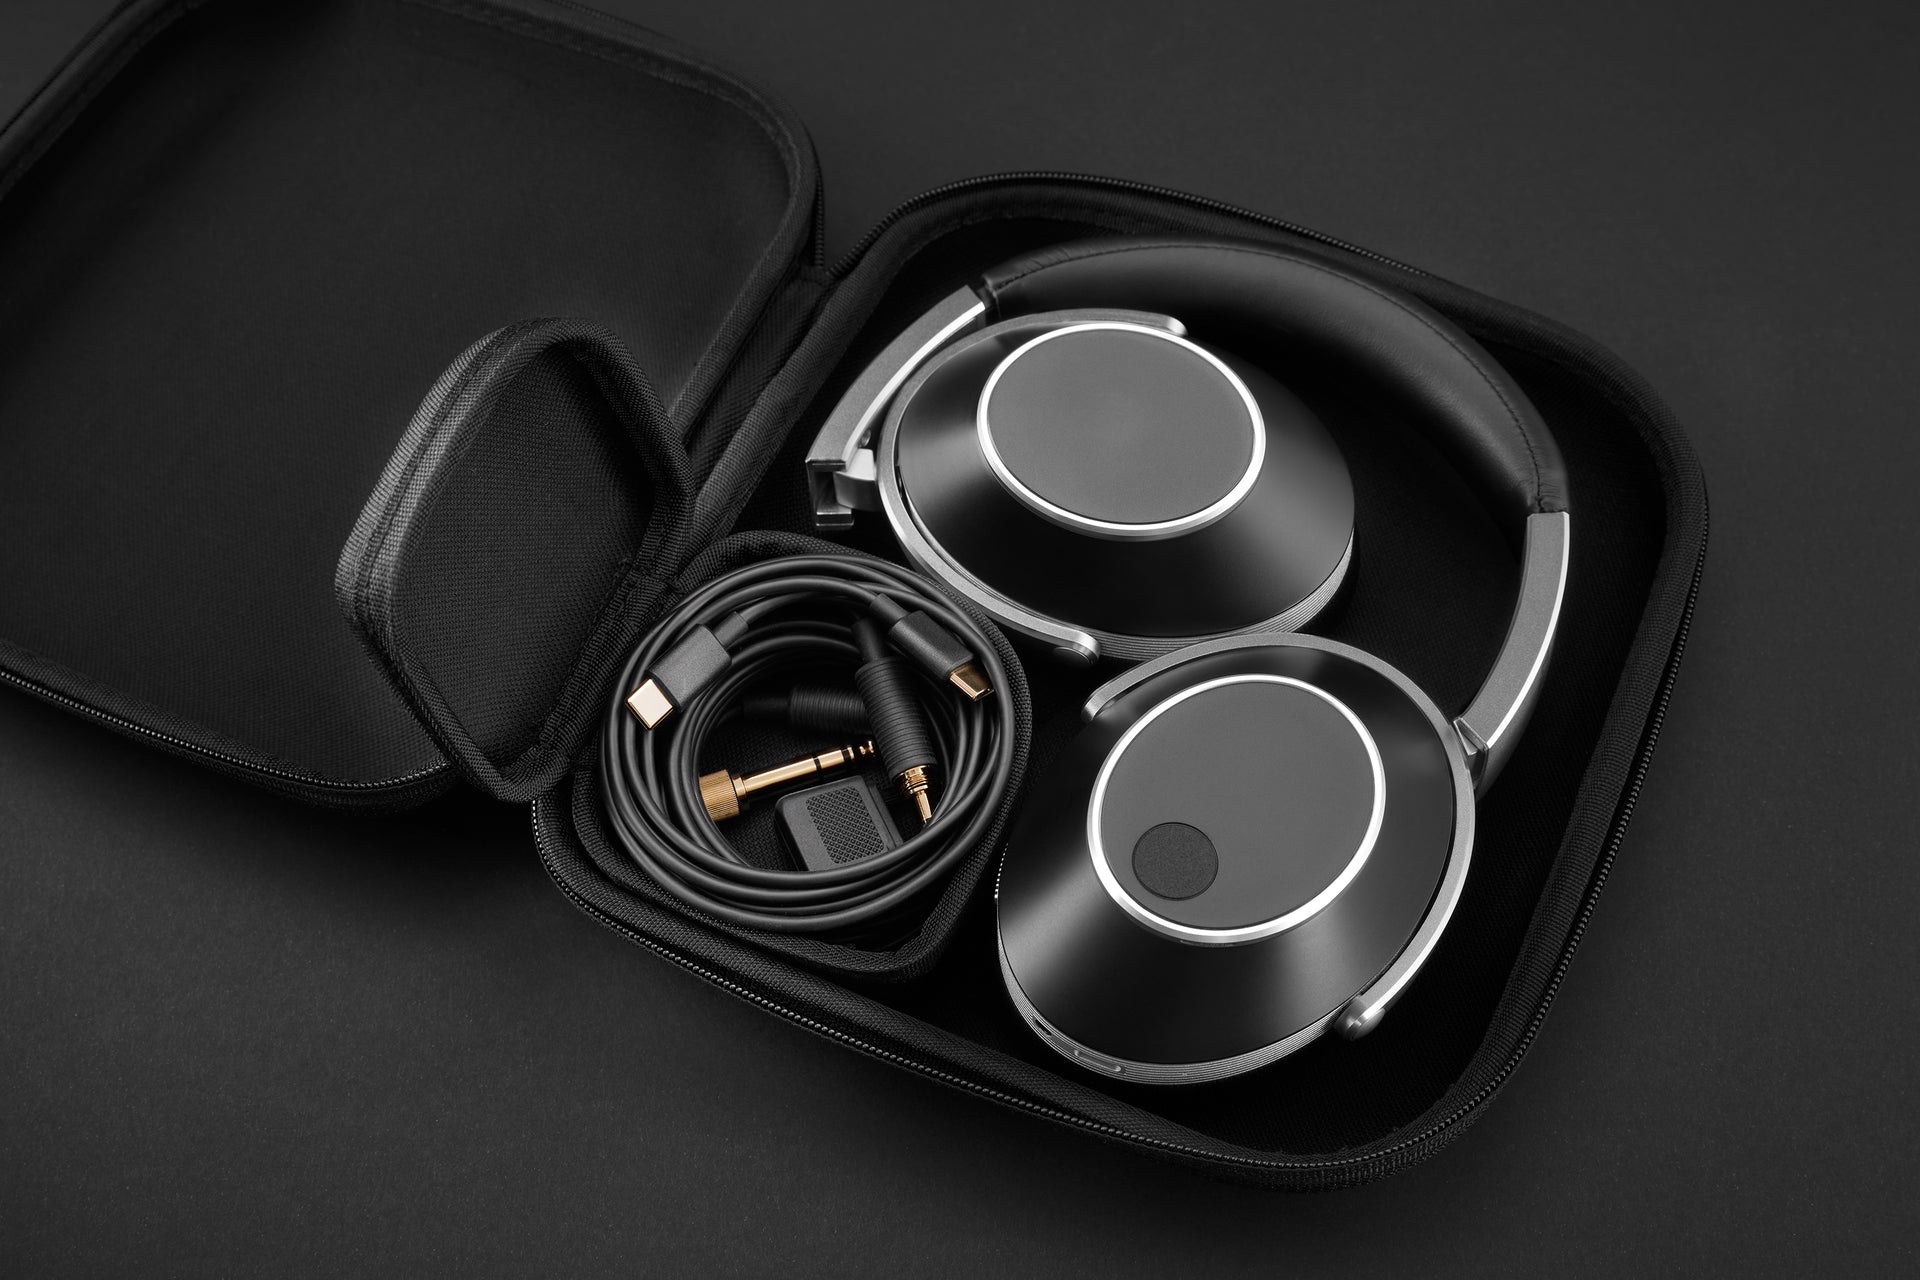 t+a solitaire t wireless headphones with active noise cancellation in black in the box